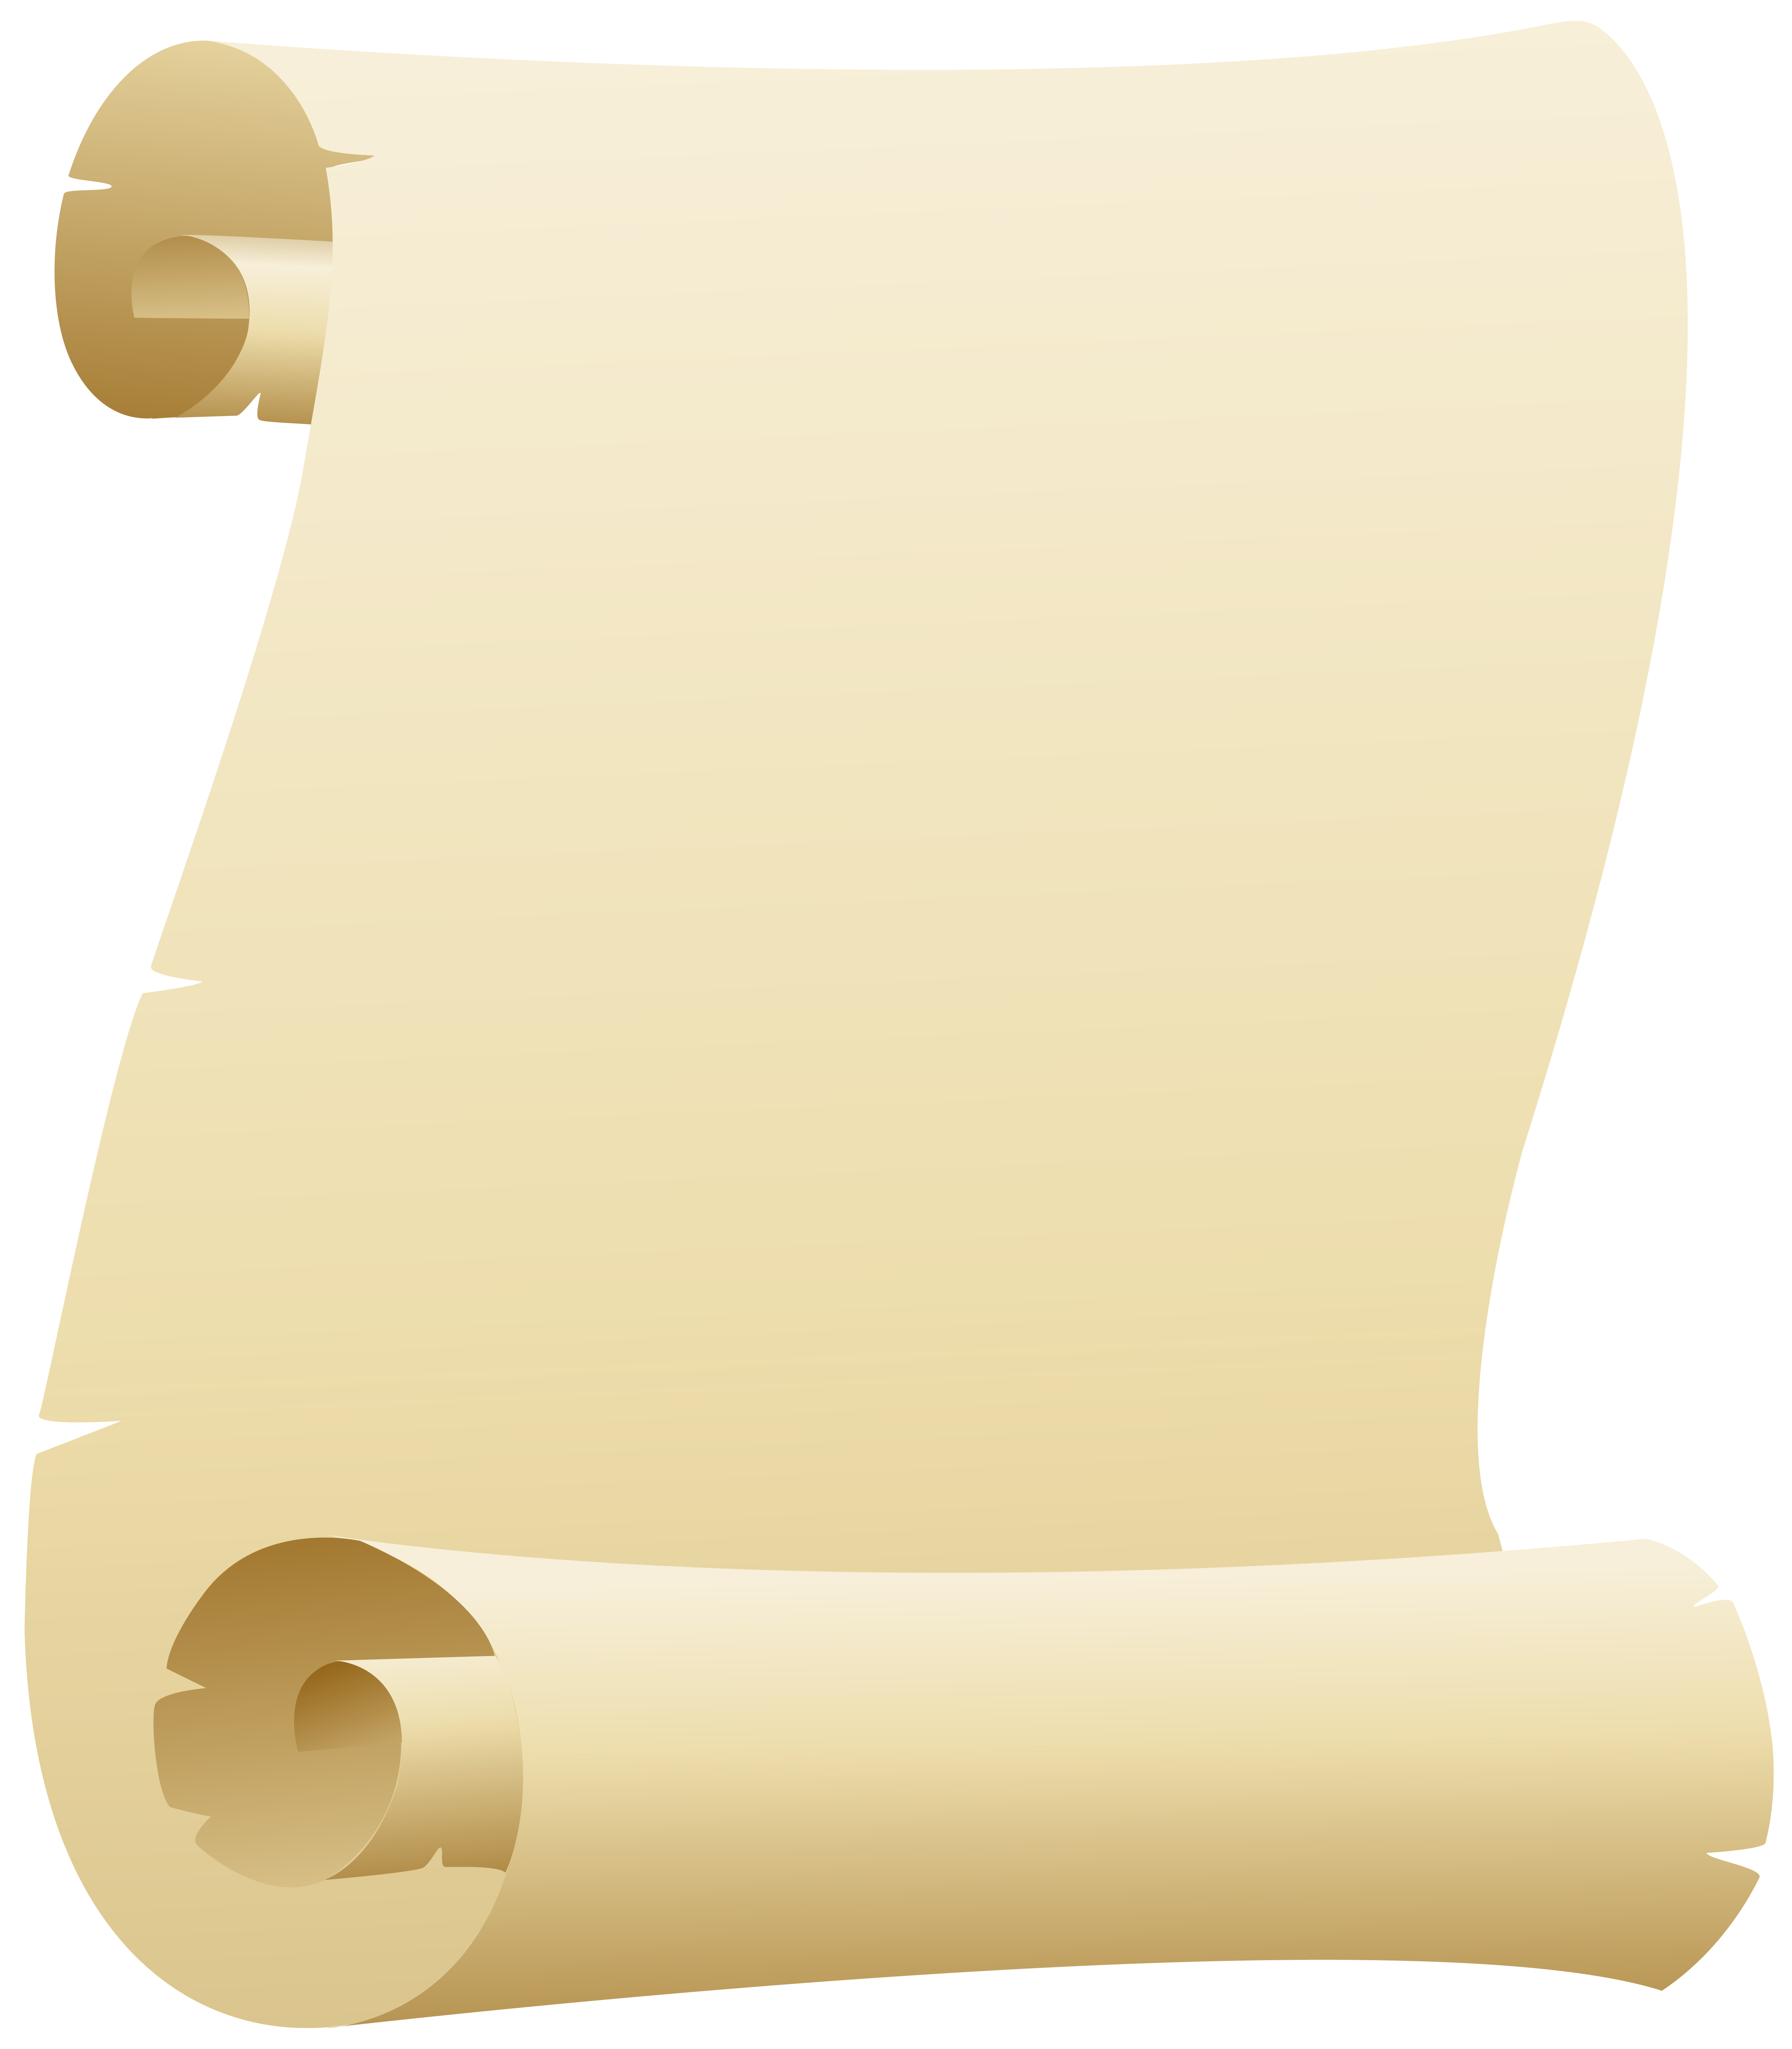 Scroll Clipart PNG Image 